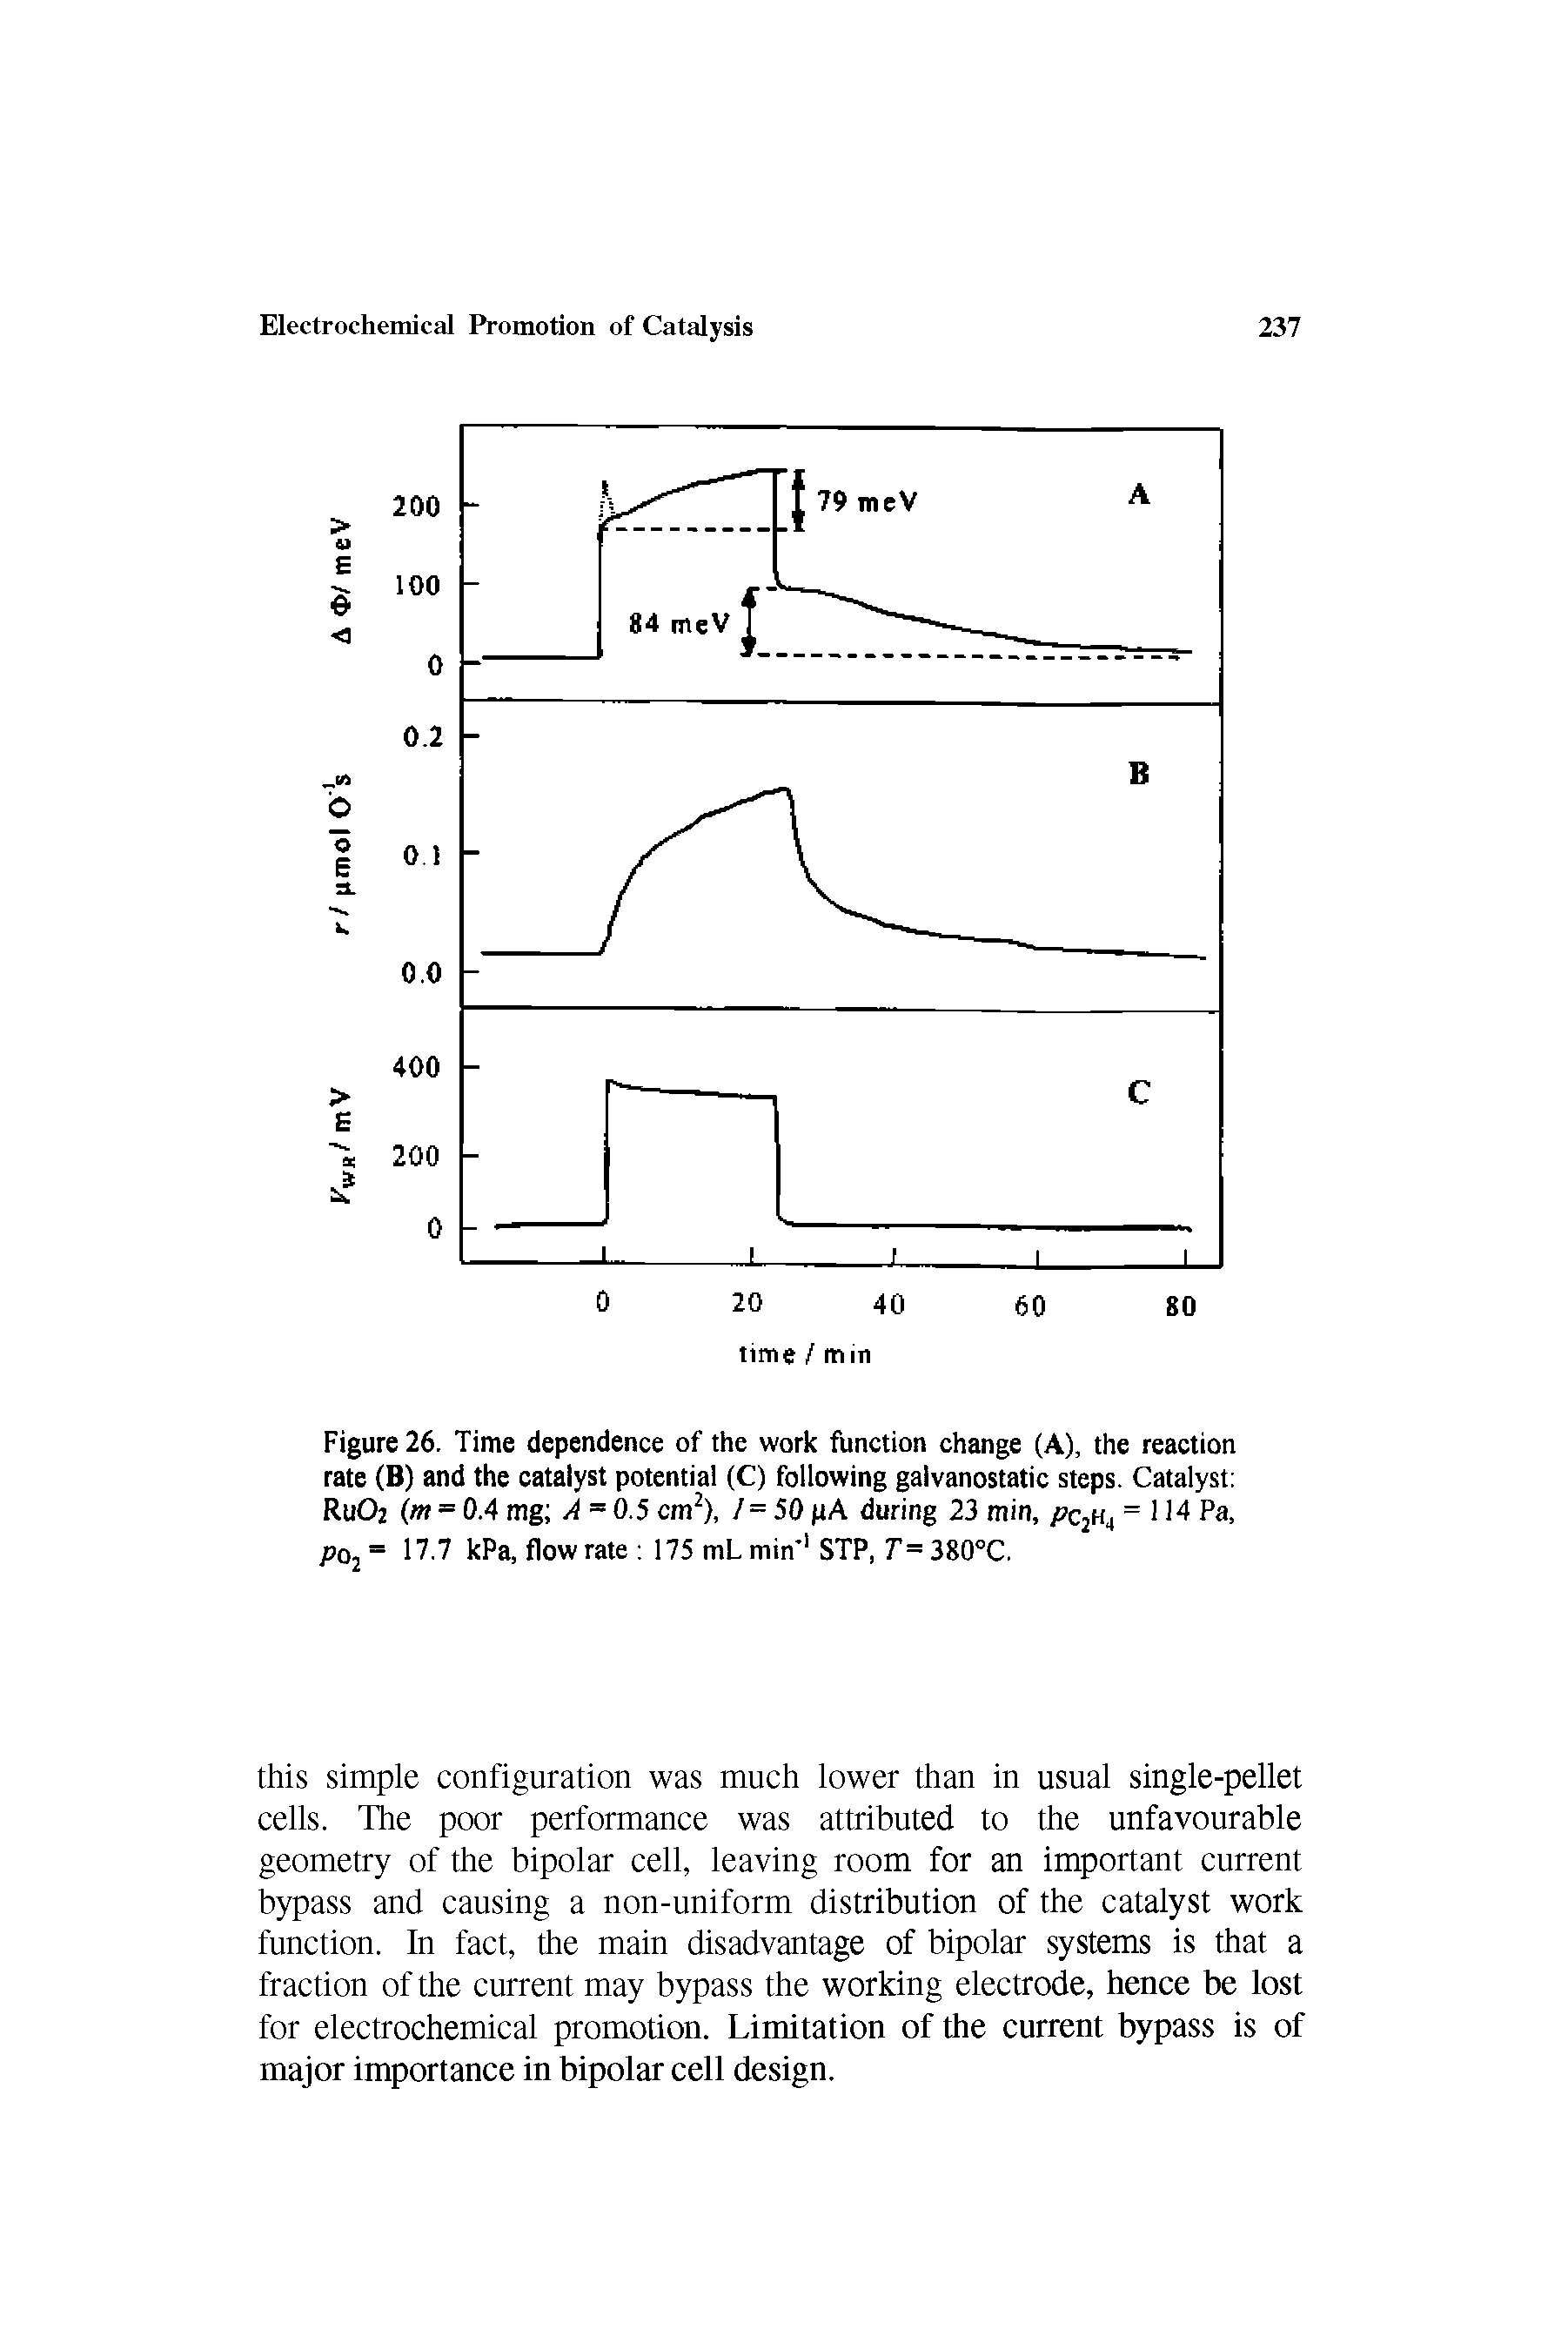 Figure 26. Time dependence of the work function change (A), the reaction rate (B) and the catalyst potential (C) following galvanostatic steps. Catalyst Ru02 (m = 0.4 mg A = 0.5 cm ), /= 50 pA during 23 min, = 114 Pa, P02 17-7 kPa, flowrate 175 mLmin STP, 7 =380°C.